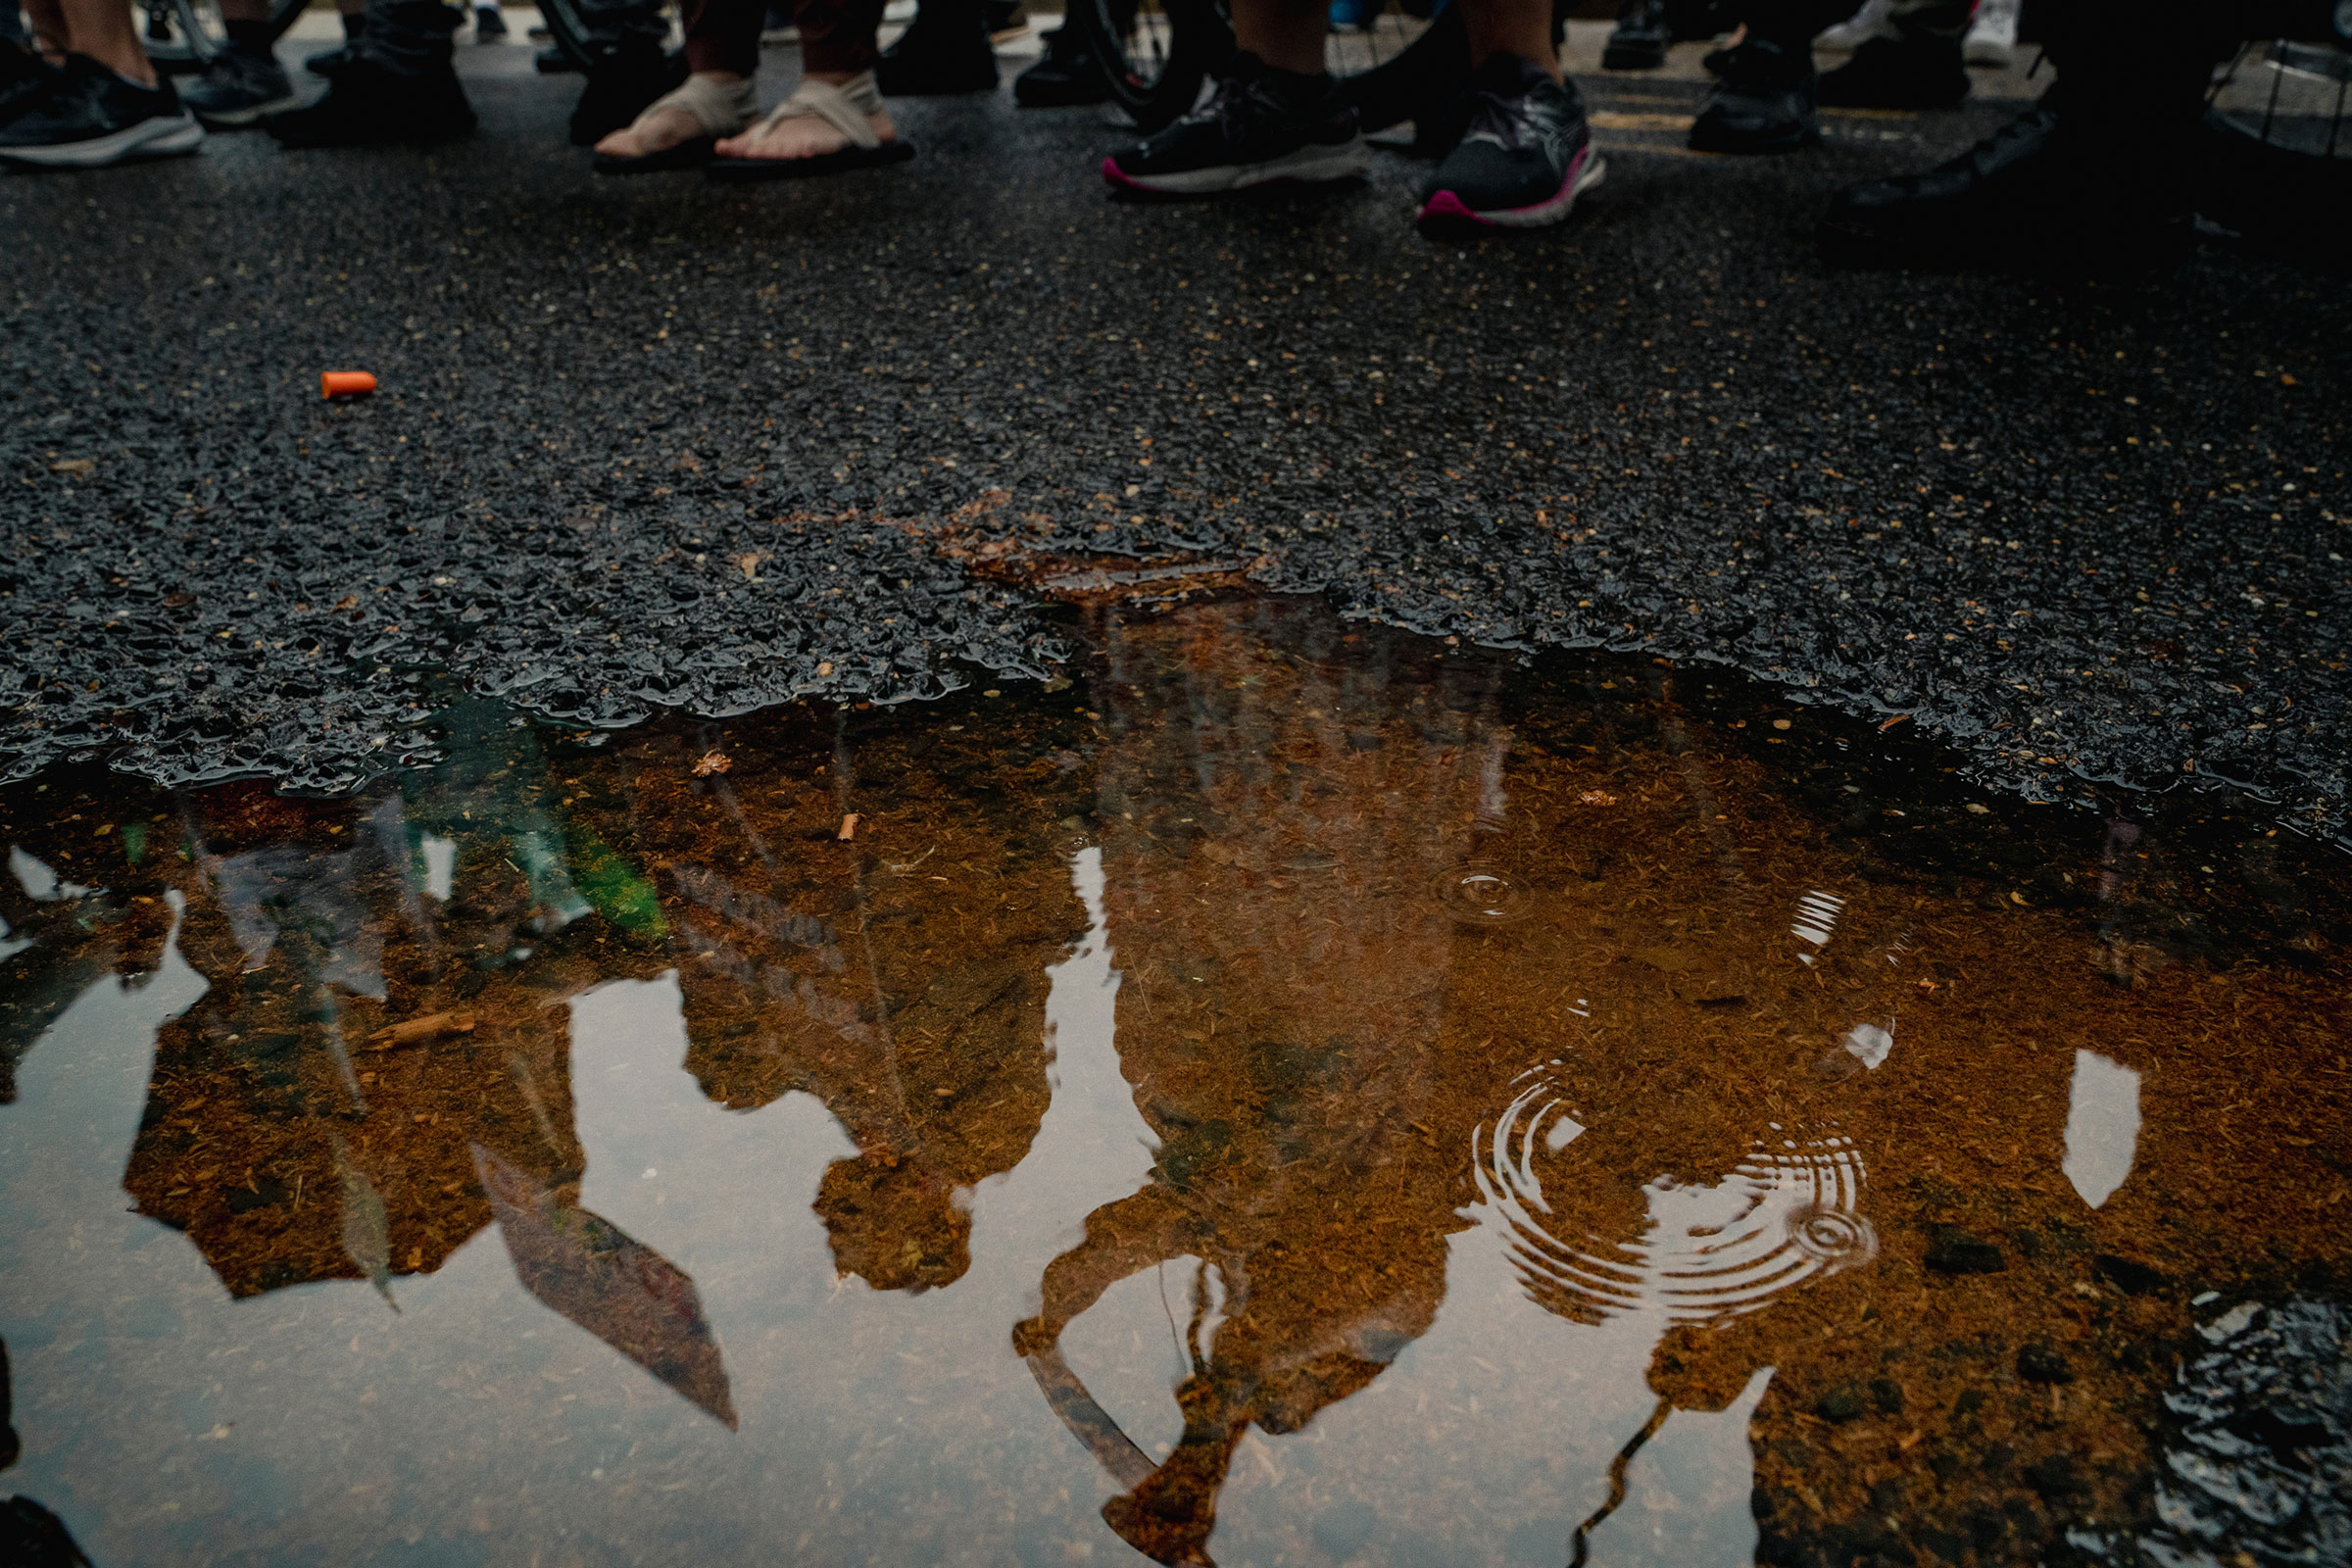 A reflection of supporters and opponents of abortion rights demonstrating is seen outside the Supreme Court Building in Washington on June 23, 2022. (Shuran Huang for TIME)